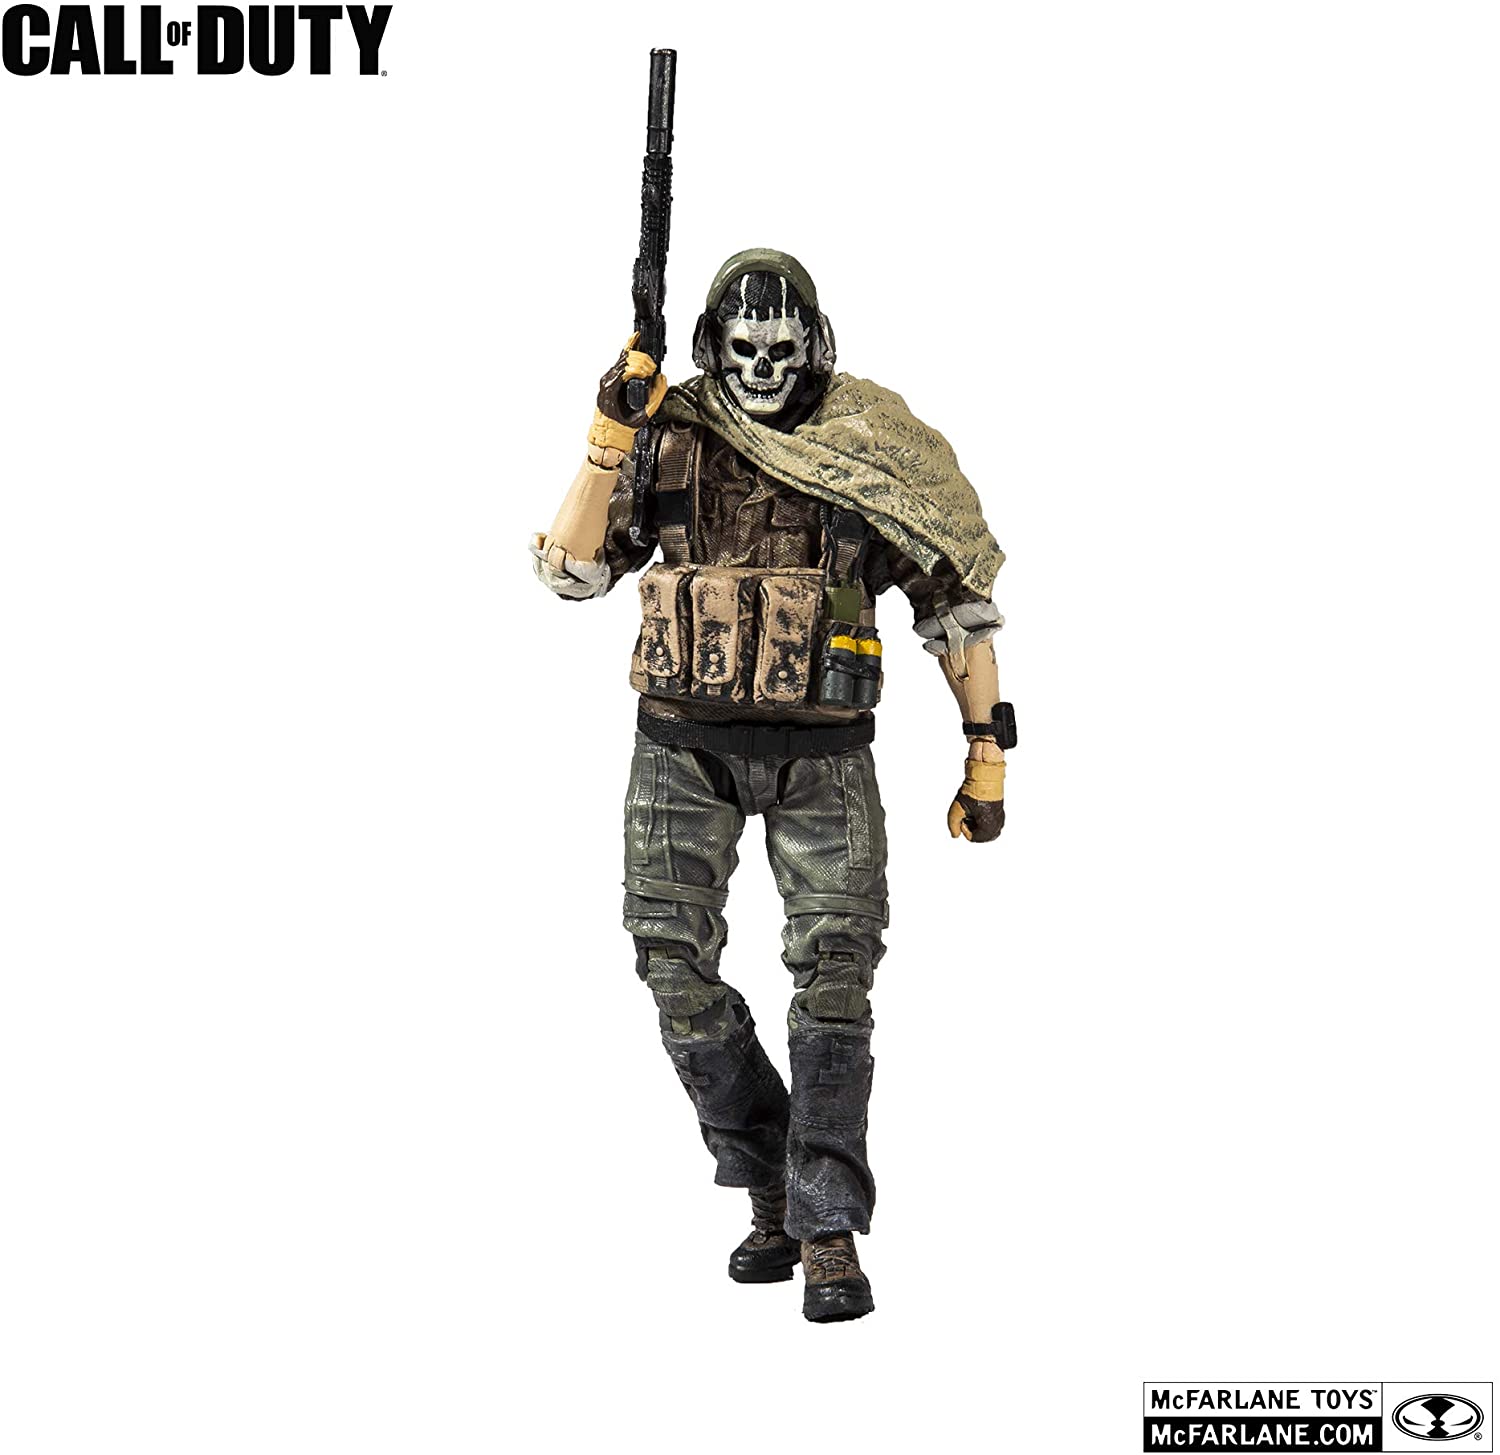 McFarlane Toys Call of Duty Ghost 2 Action Figure: Toys & Games